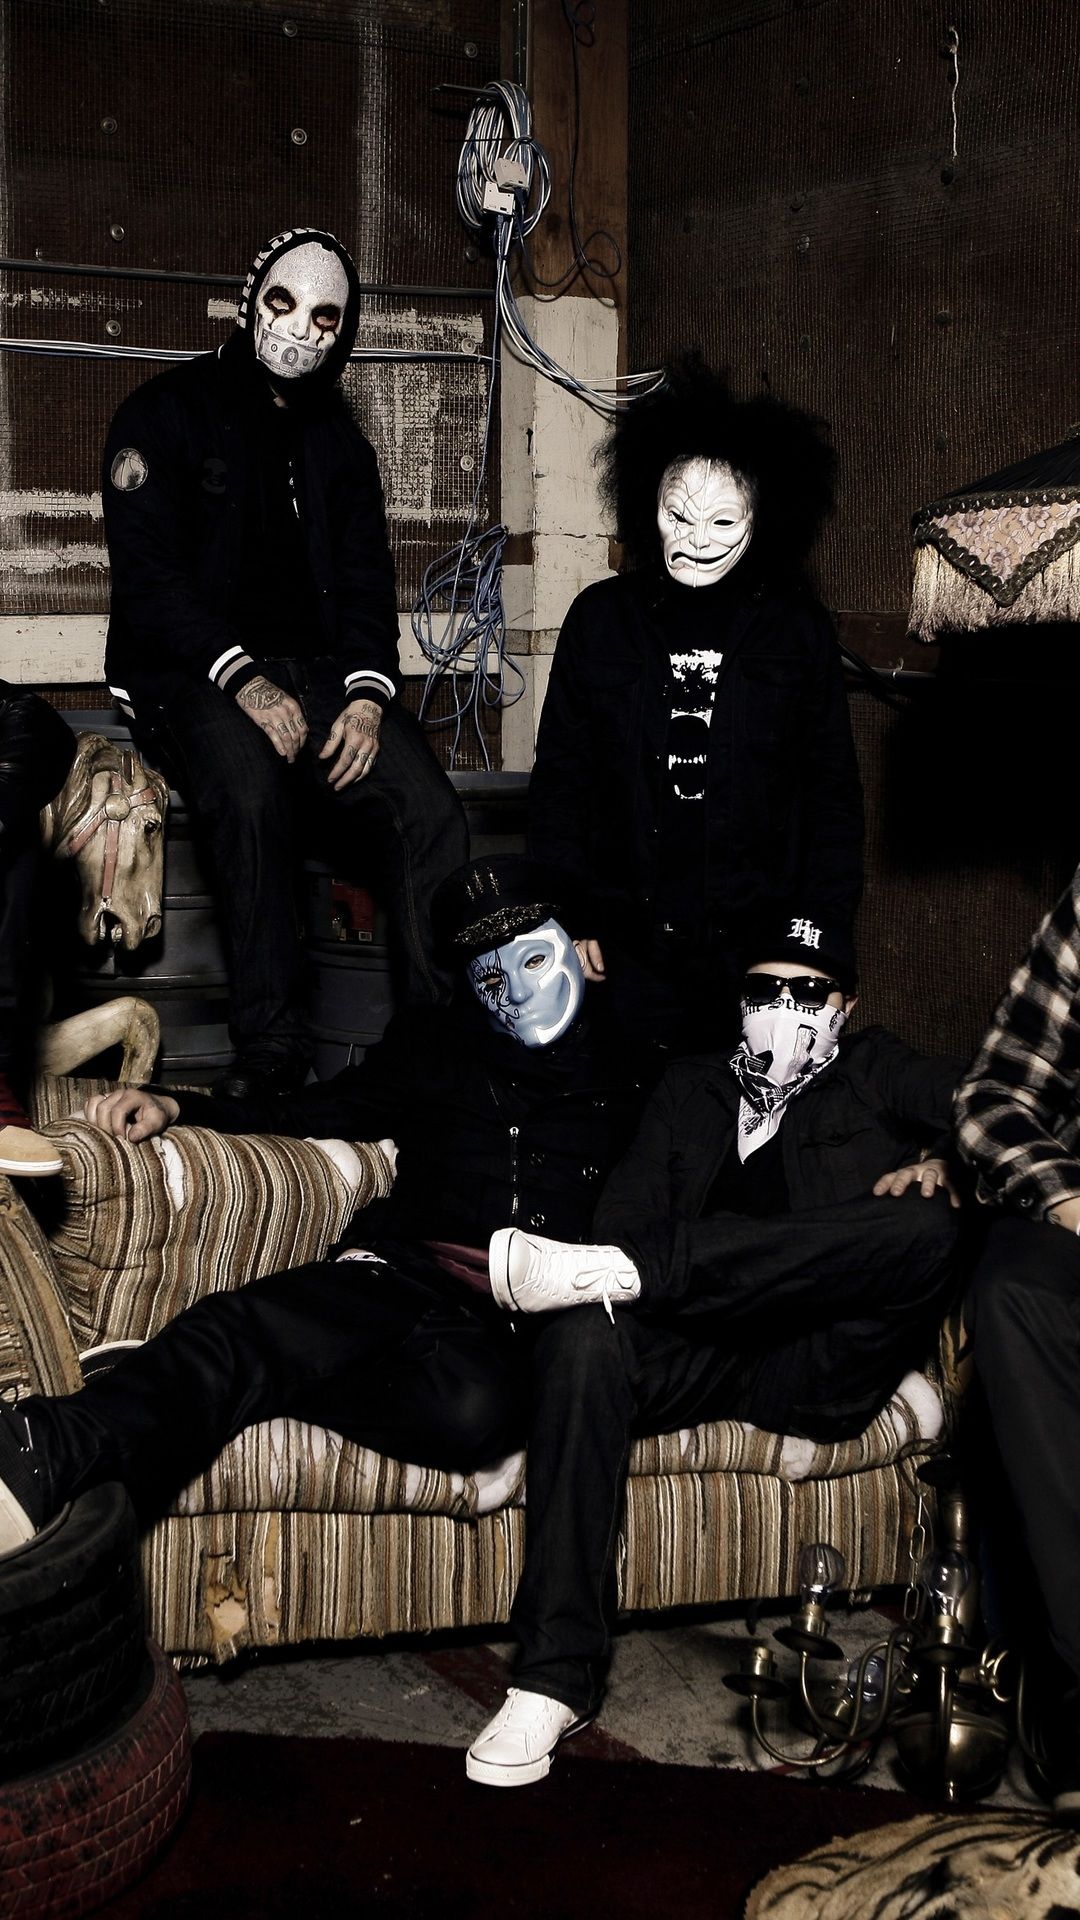 Hollywood Undead Wallpaper Backgrounds 70 images